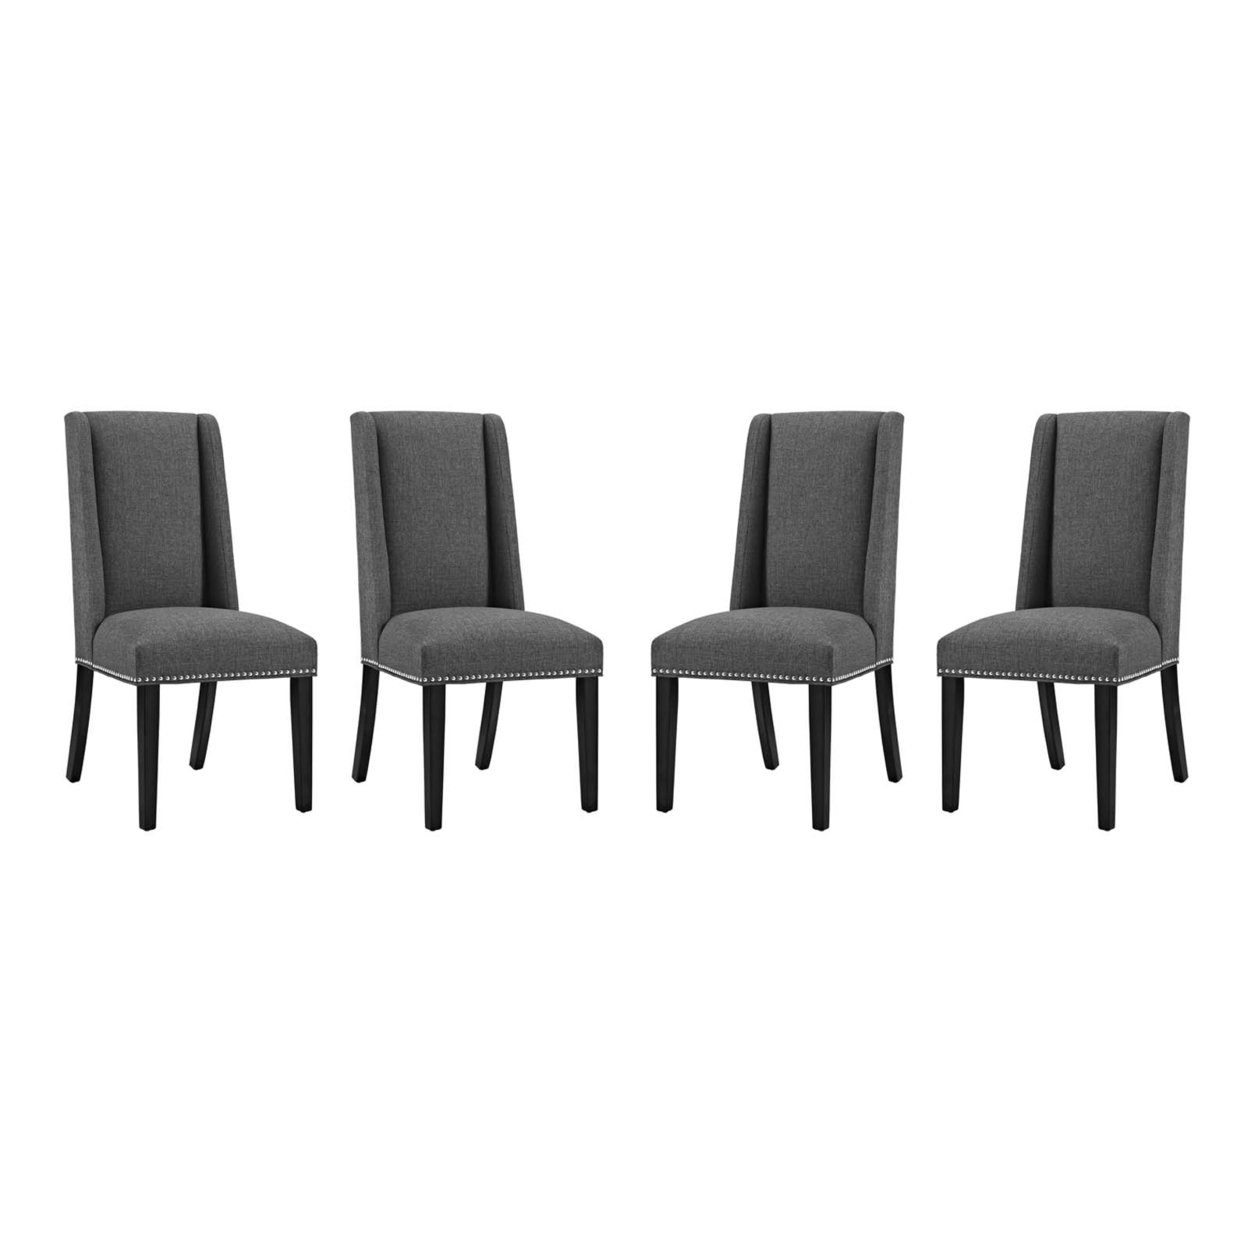 Baron Dining Chair Fabric Set Of 4, Gray